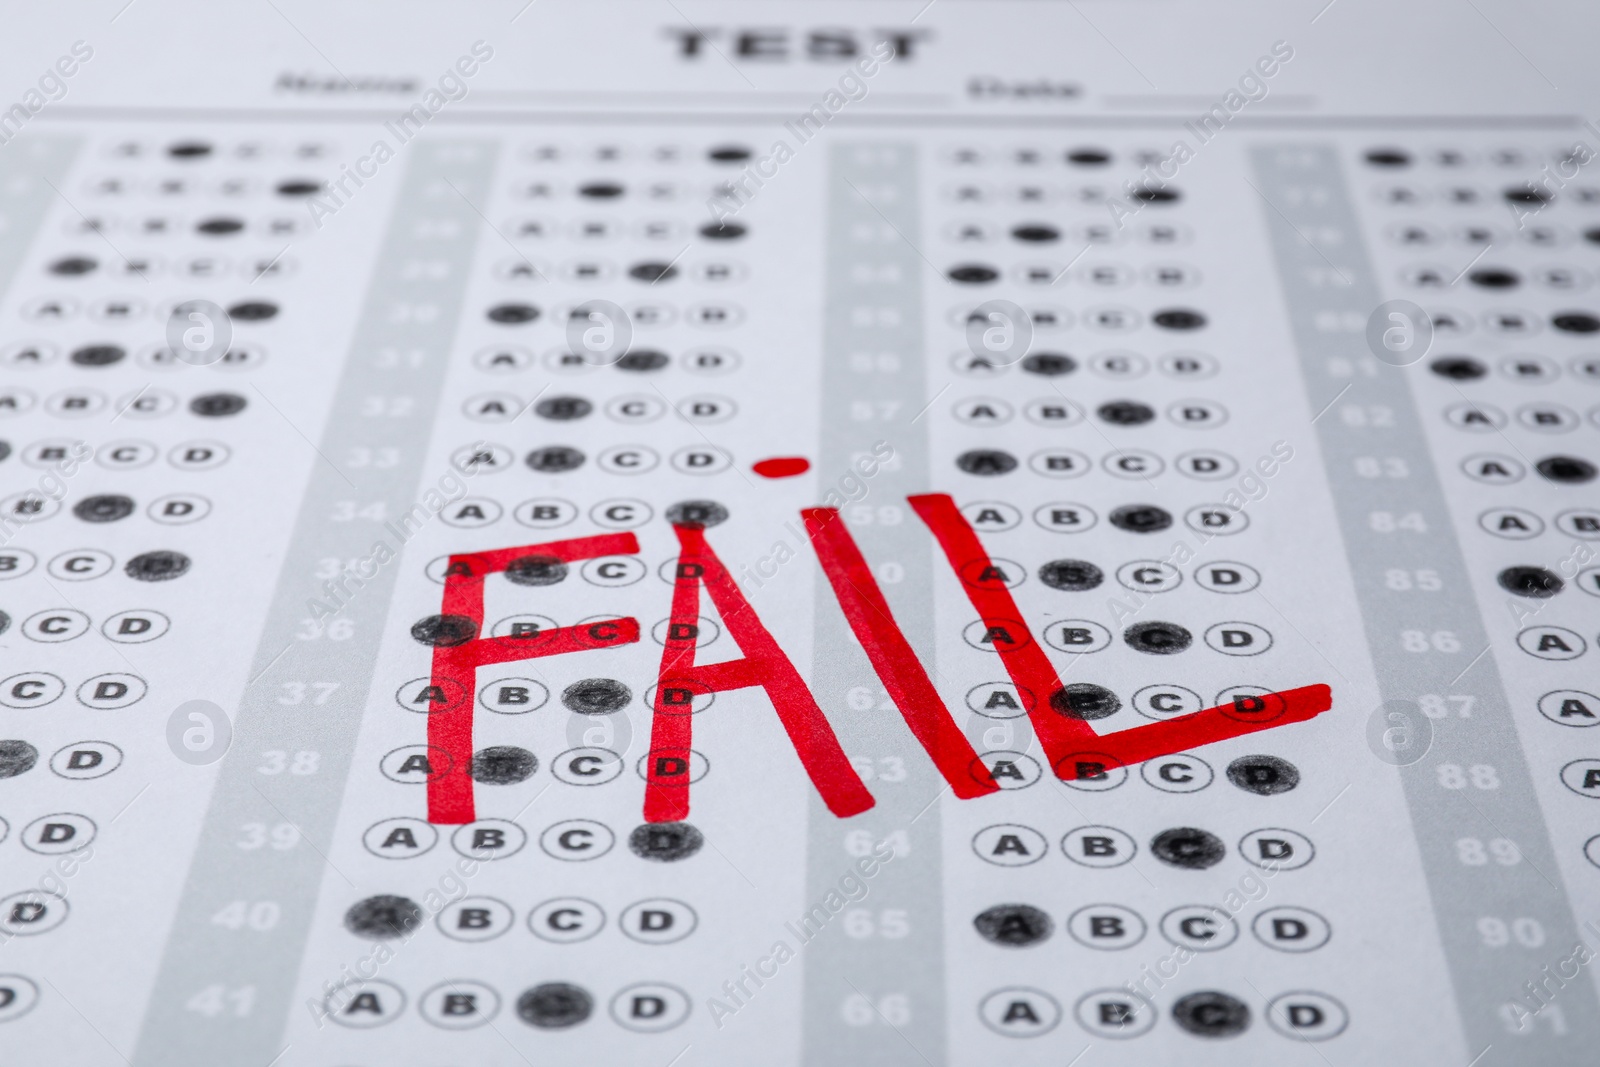 Photo of Word Fail written with red marker on answer sheet, closeup. Student passing exam